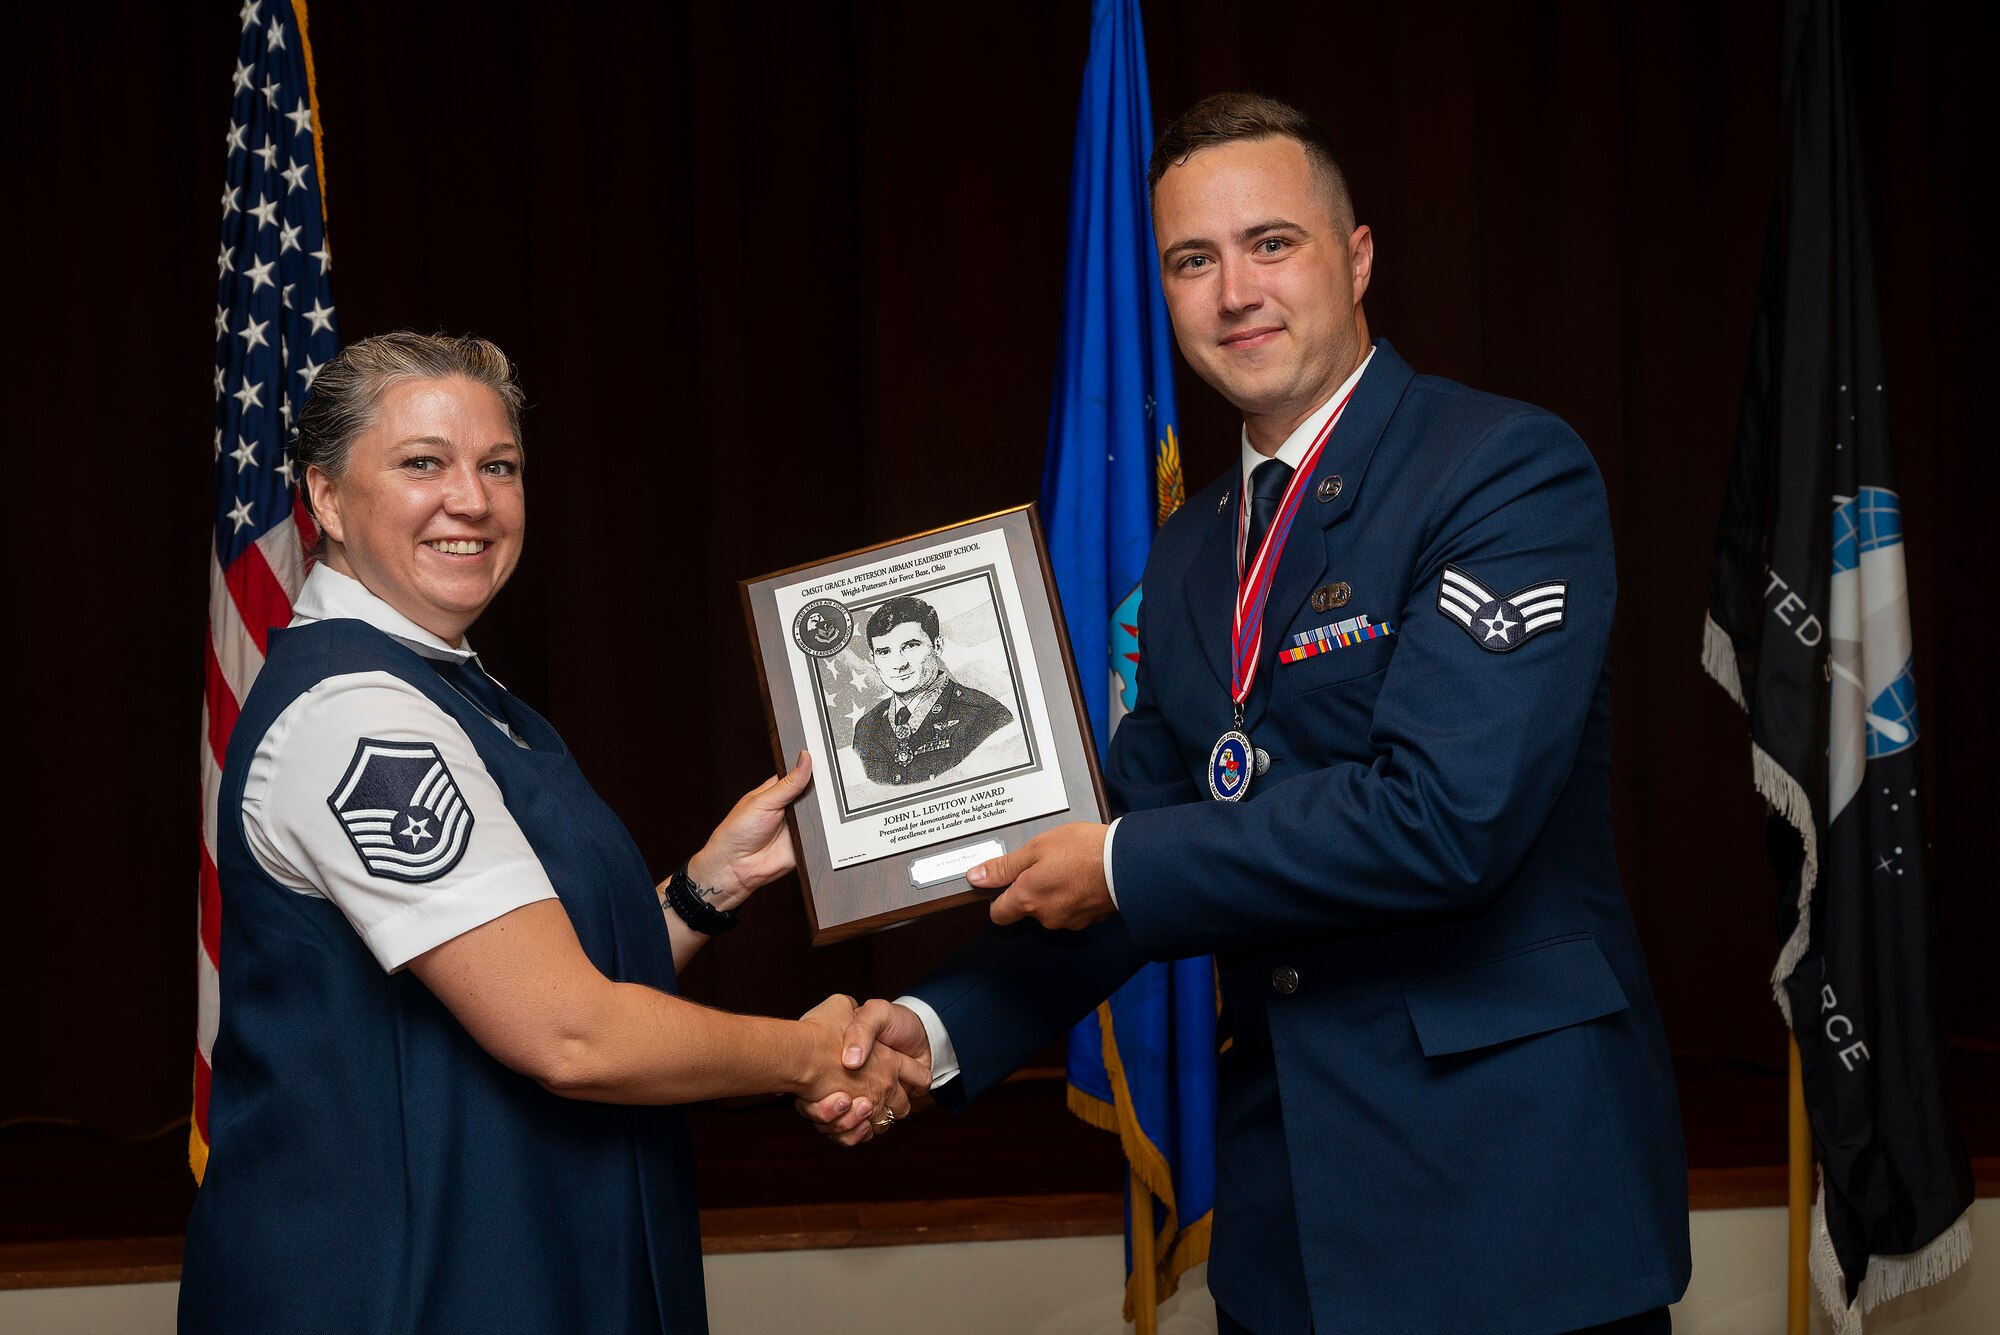 Master Sgt. Dominique Hix, Air Force Sergeants Association, presents Airman Arthur Marais, National Air and Space Intelligence Center, with the John L. Levitow Award at the Chief Master Sgt. Grace A. Peterson Airman Leadership School Class 22-E graduation ceremony, June 16, 2022, at Wright-Patterson Air Force Base, Ohio. The John L. Levitow Award goes to the class’s top graduate. (U.S. Air Force photo by R.J. Oriez)